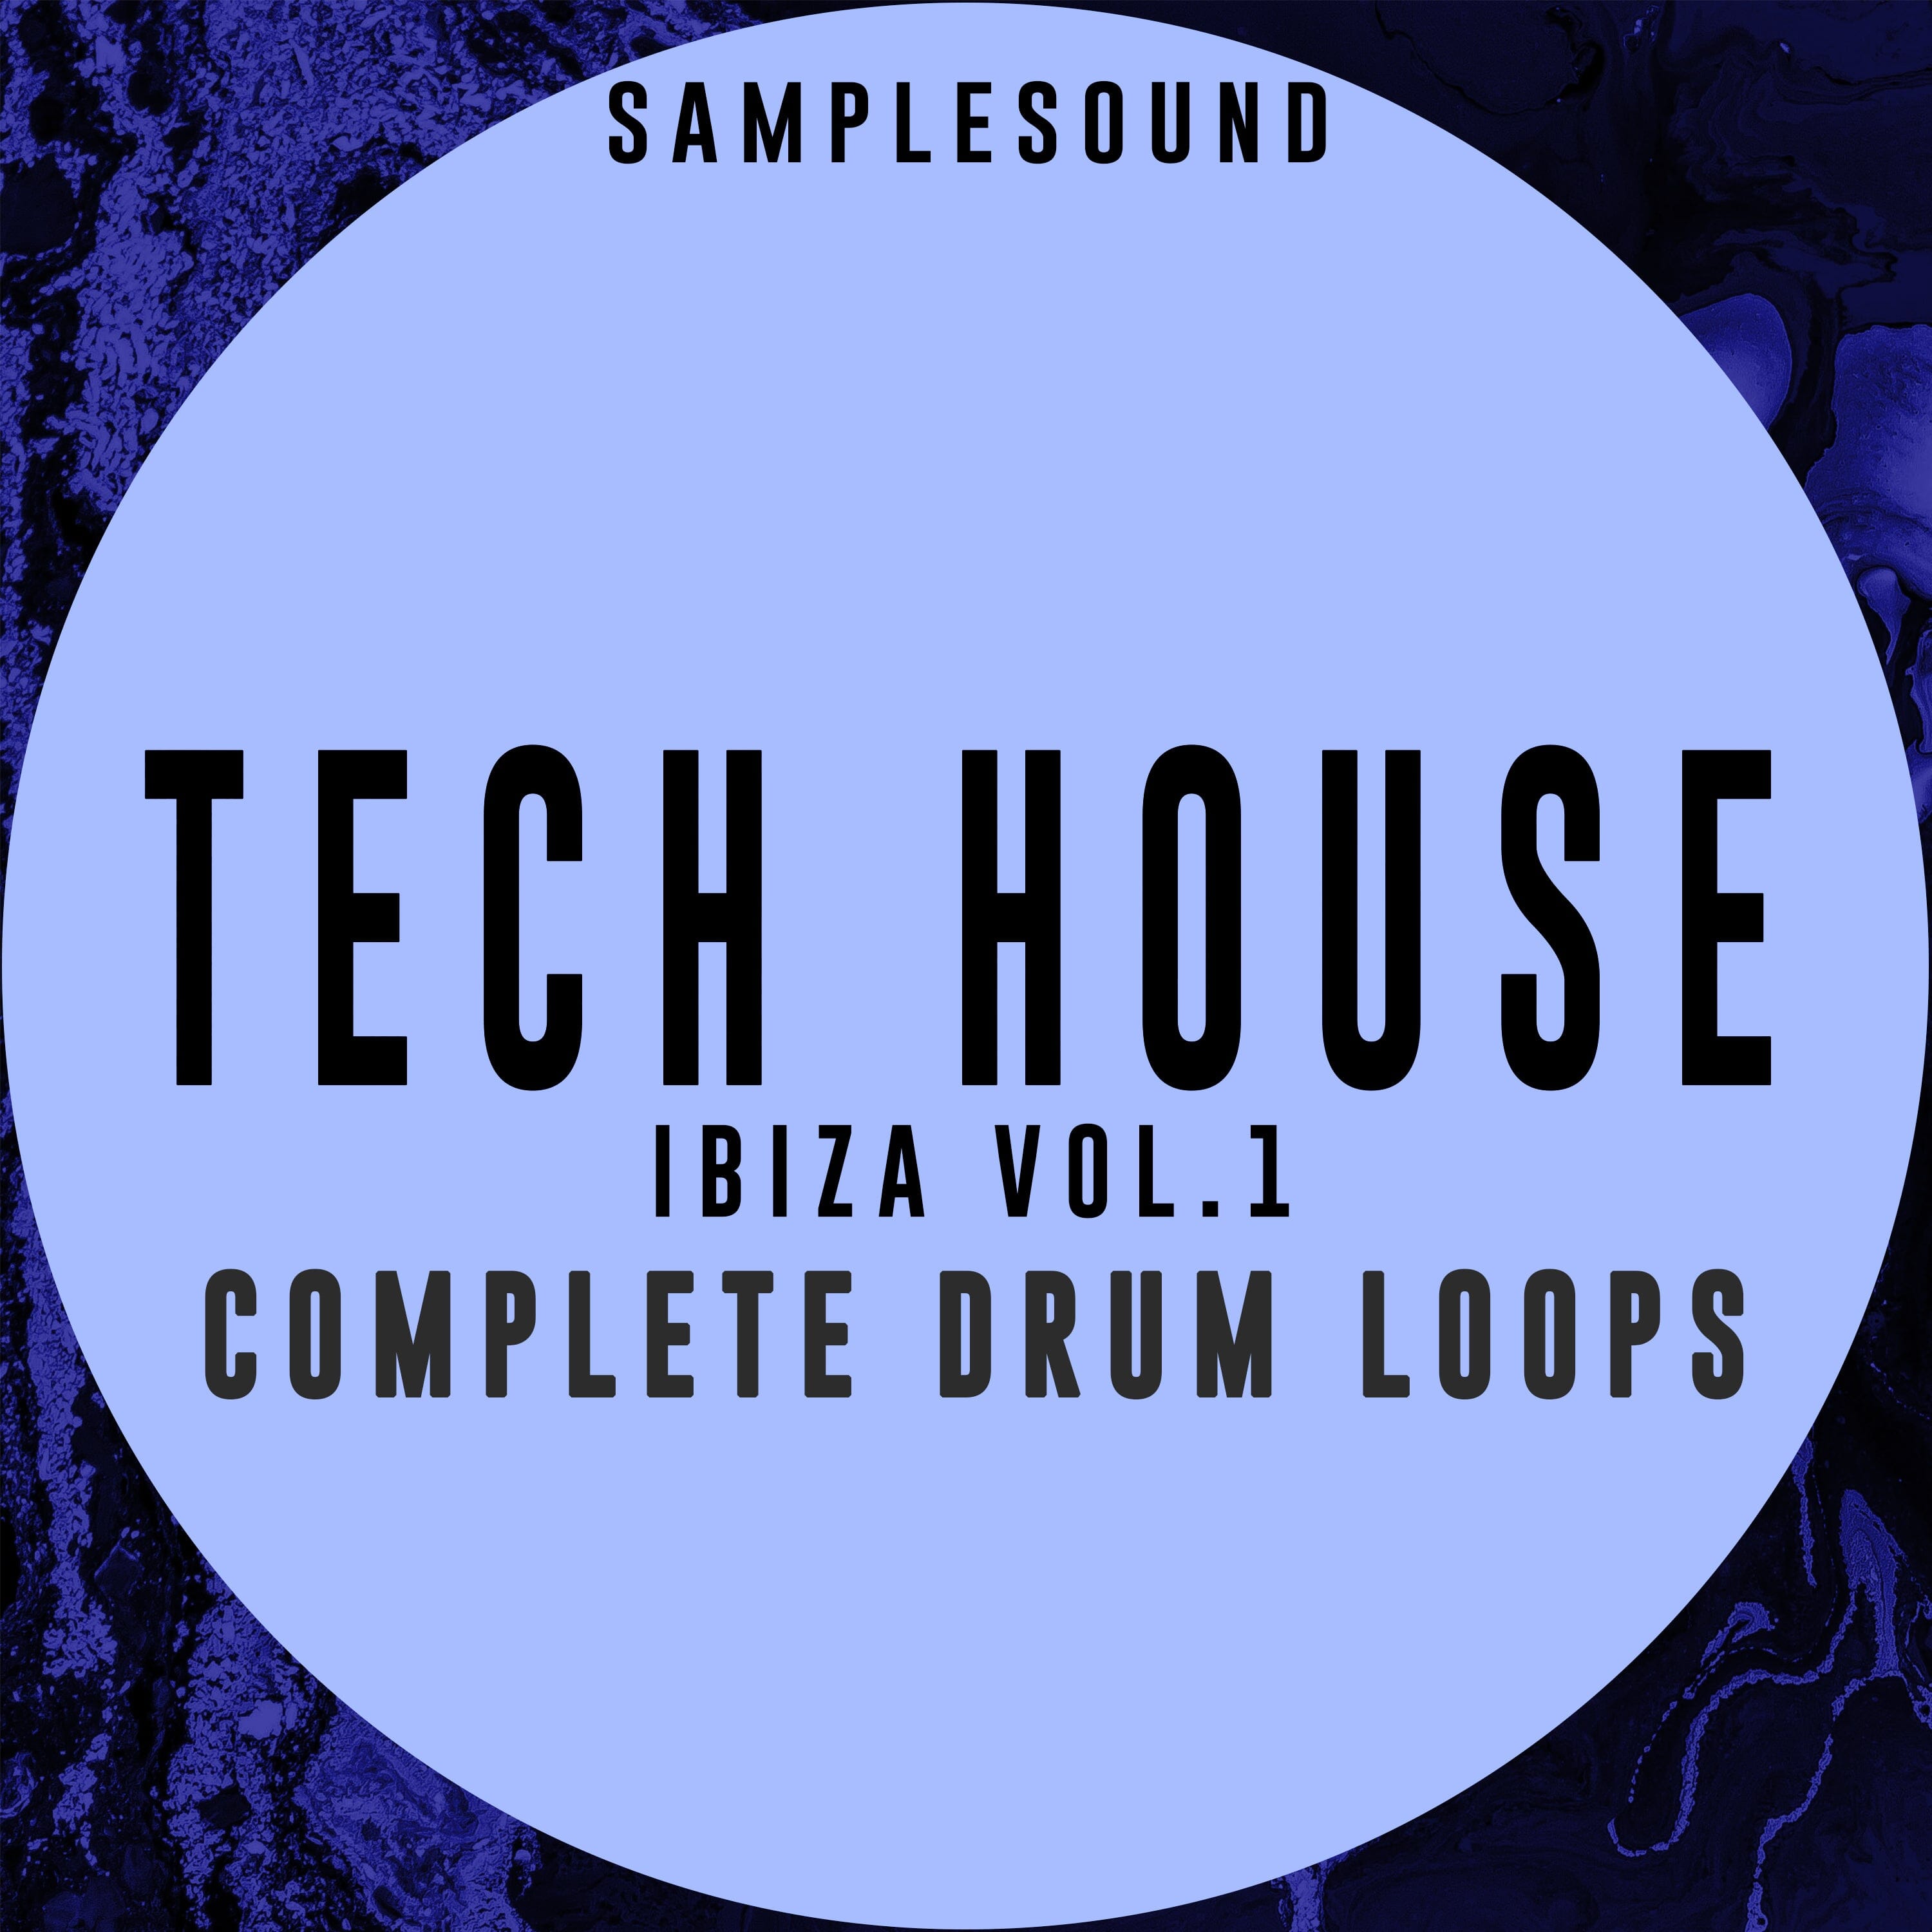 FL Studio Samples, Your Place For DJ Samples, Loops, and Many More.